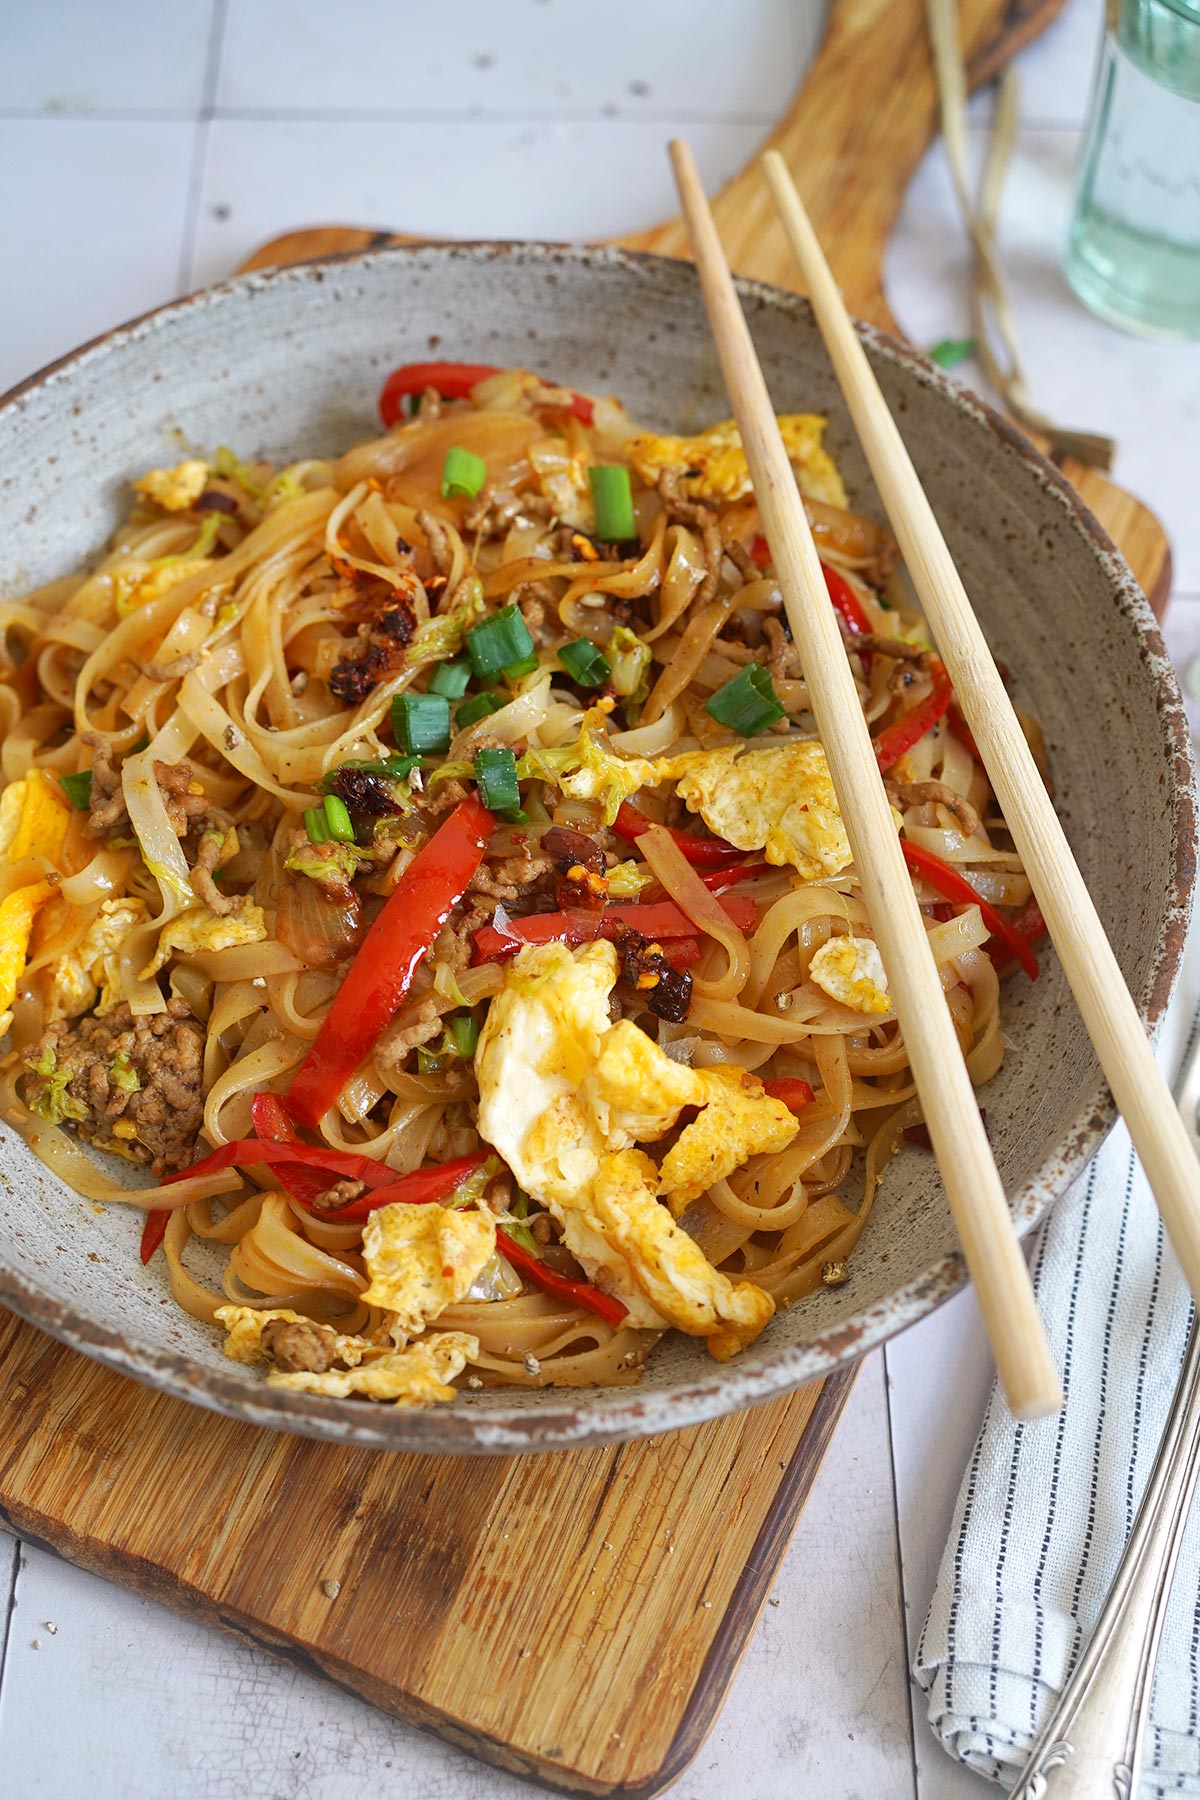 Stir-fry Singapore Noodles with Pork | Bake to the roots